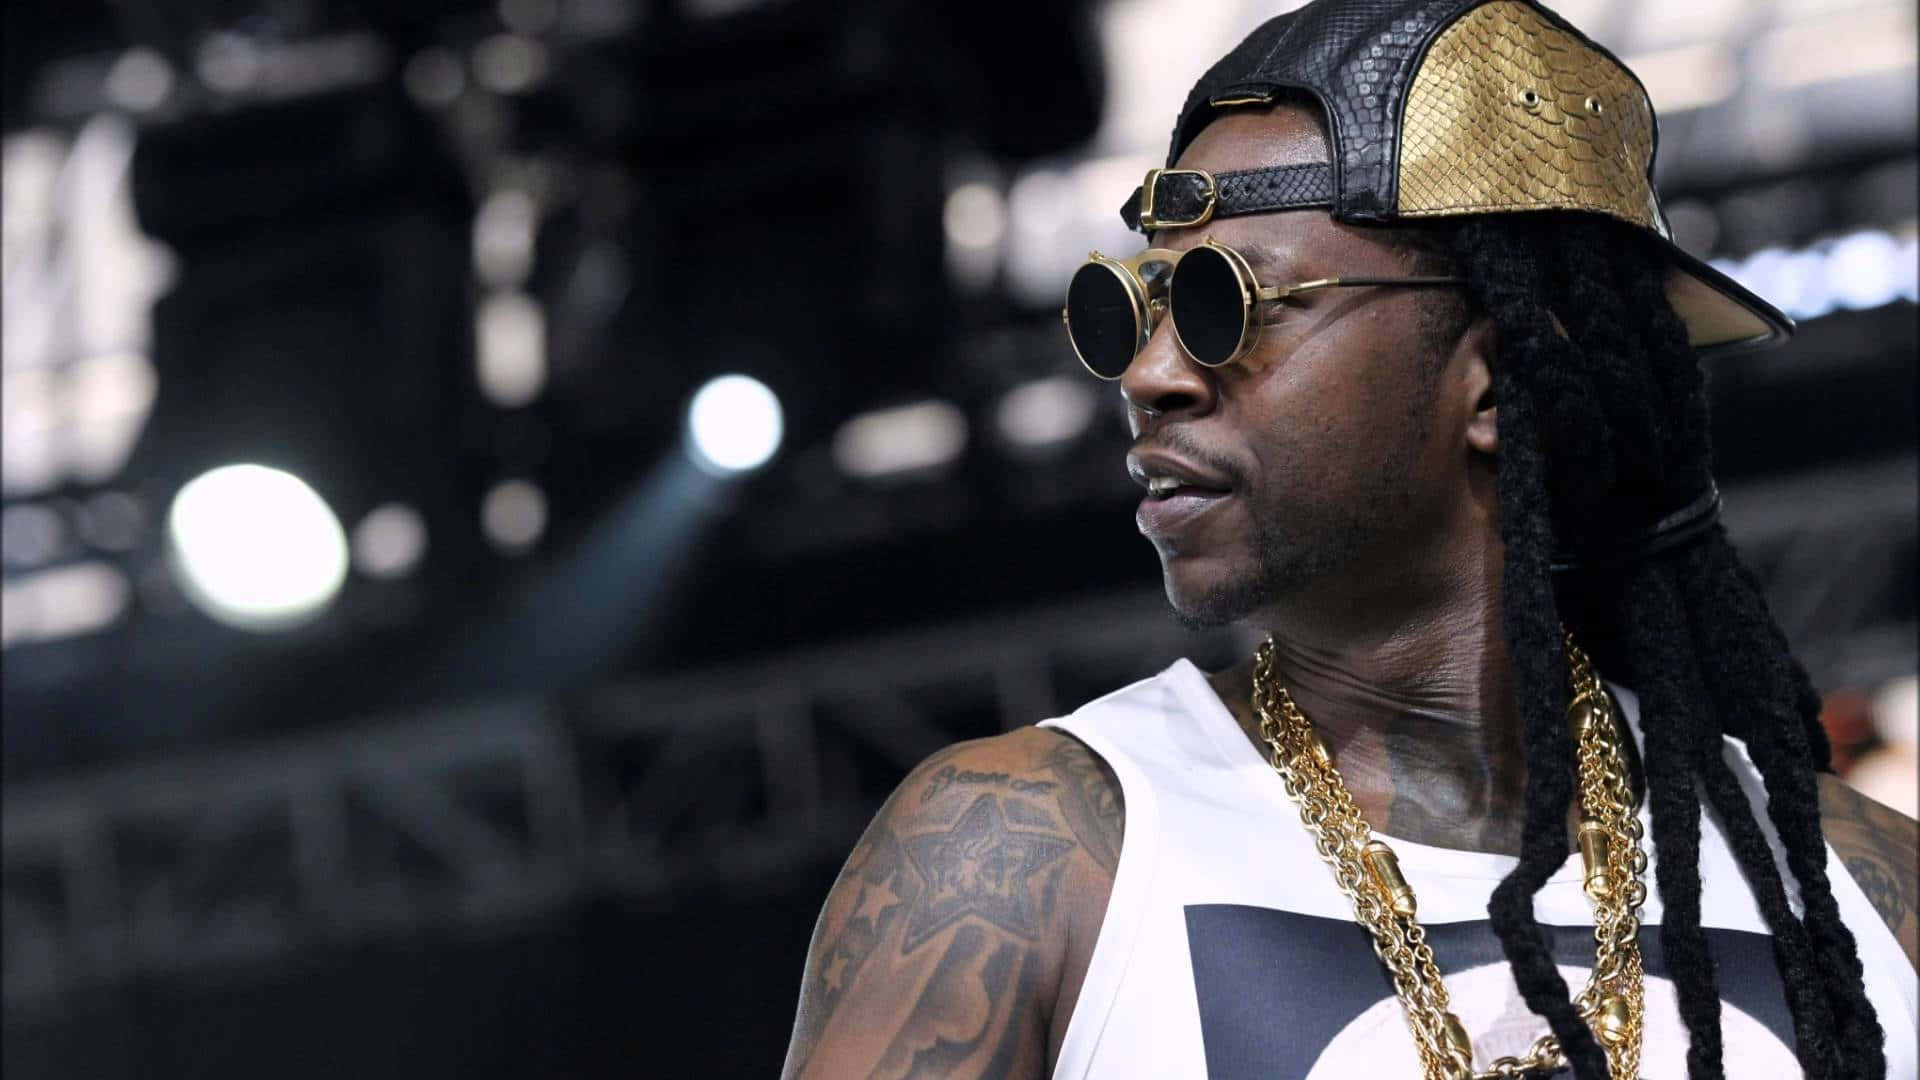 2 Chainz shows off his charismatic smile